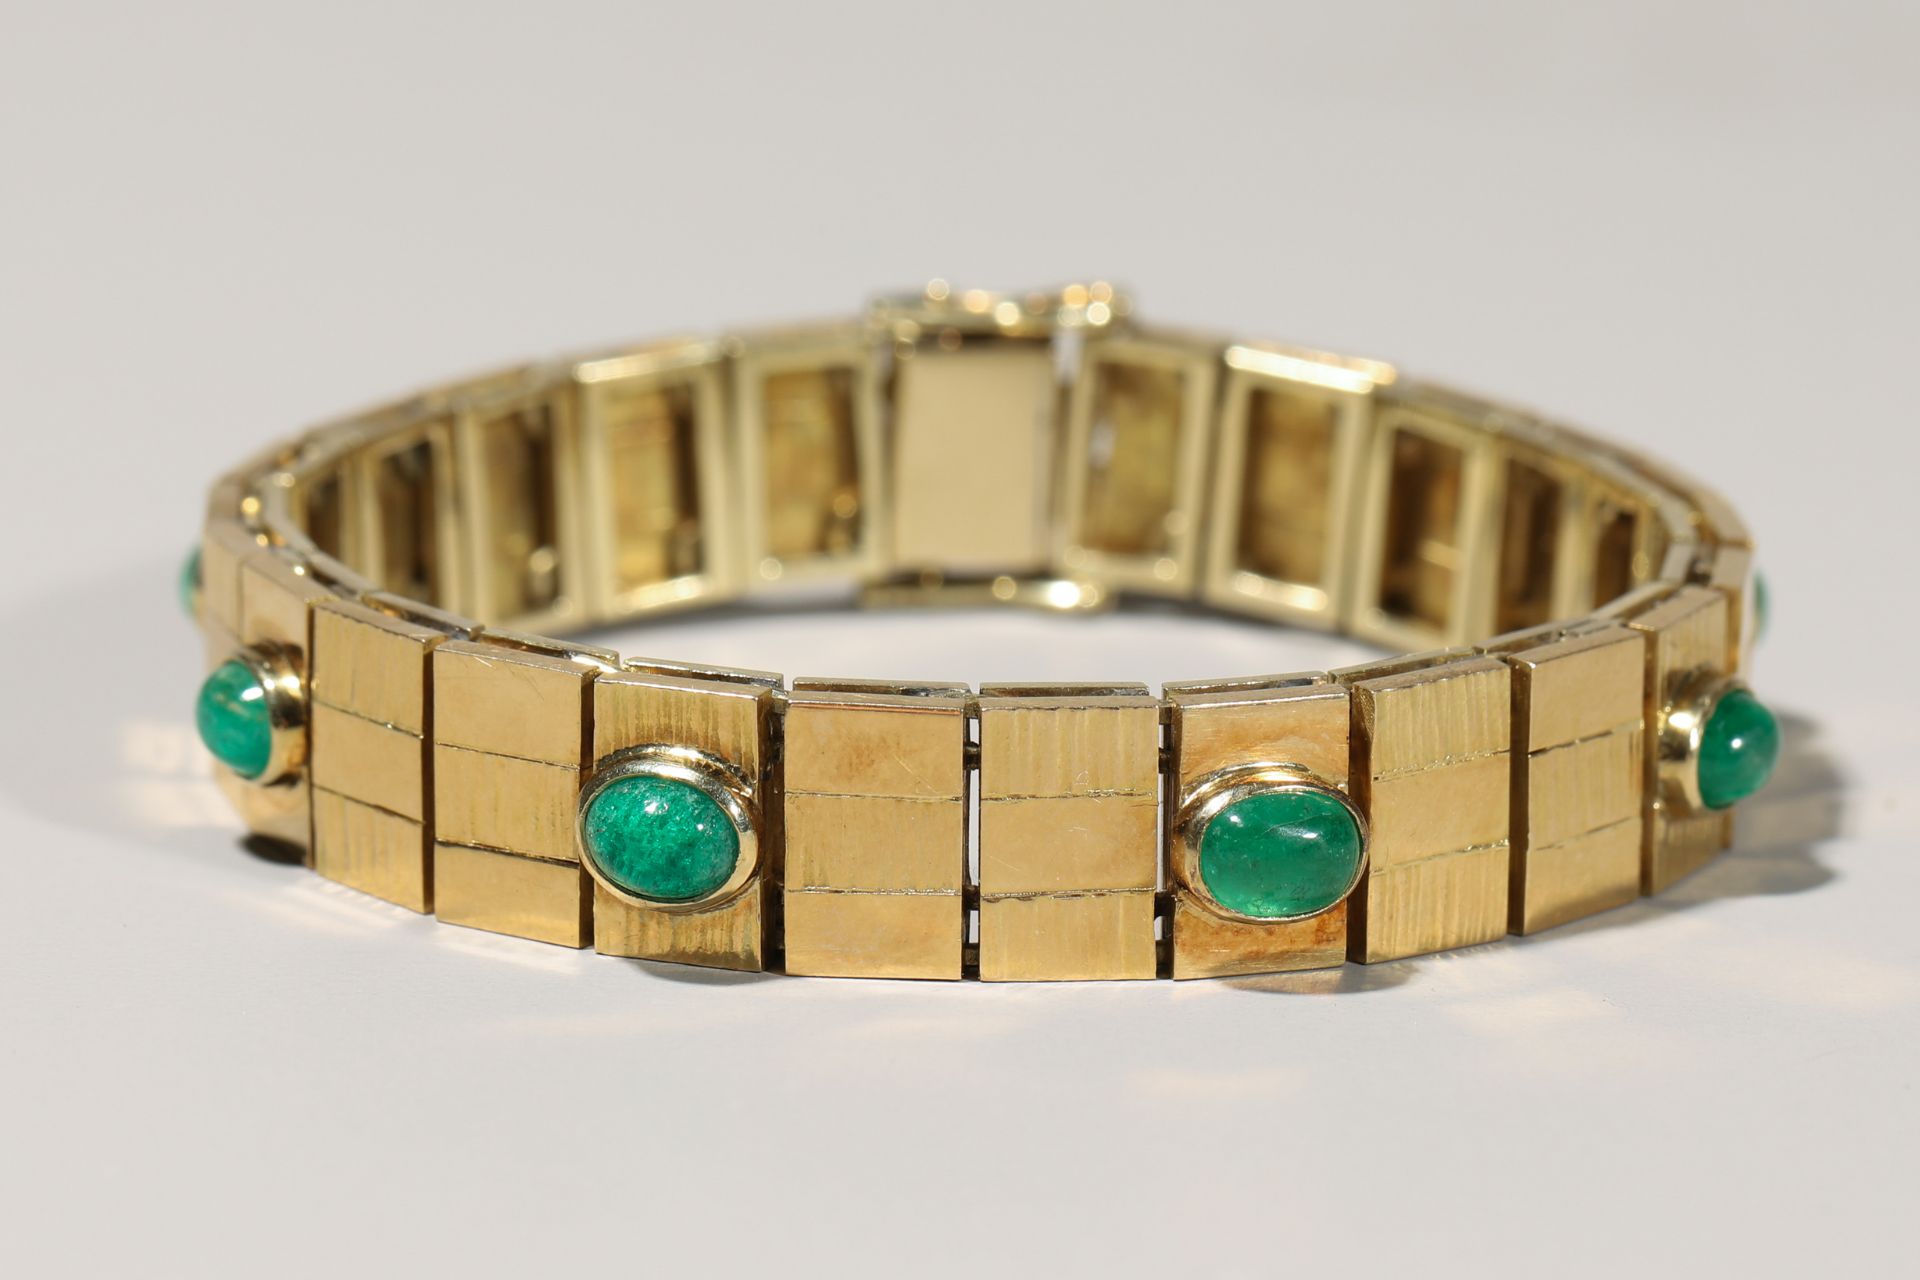 Gold bracelet with emerald cabochons - Image 3 of 7